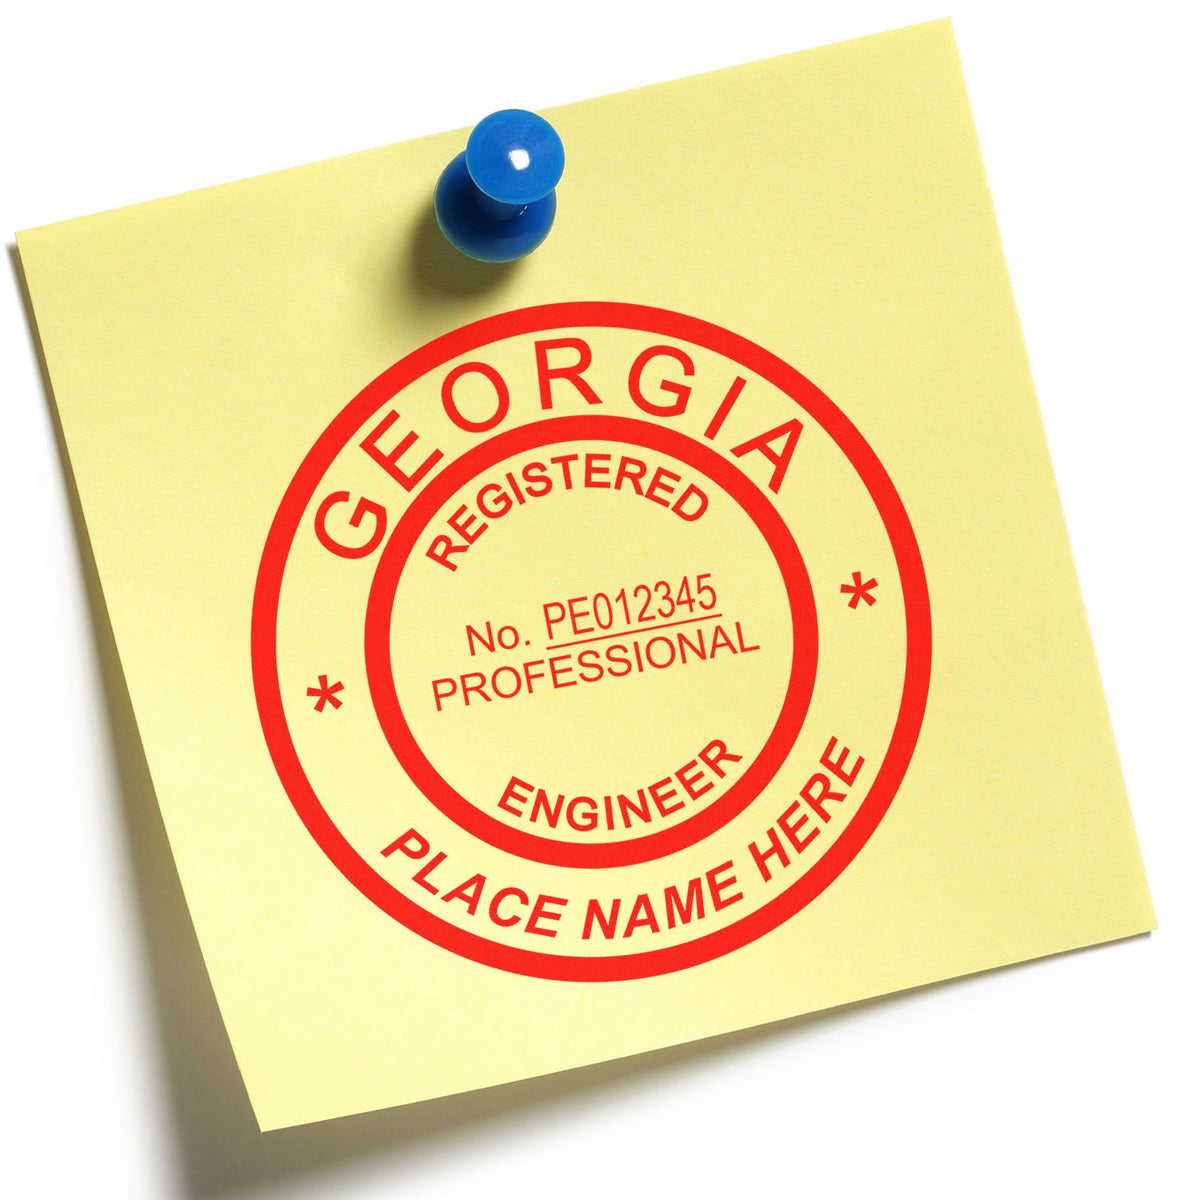 A lifestyle photo showing a stamped image of the Georgia Professional Engineer Seal Stamp on a piece of paper